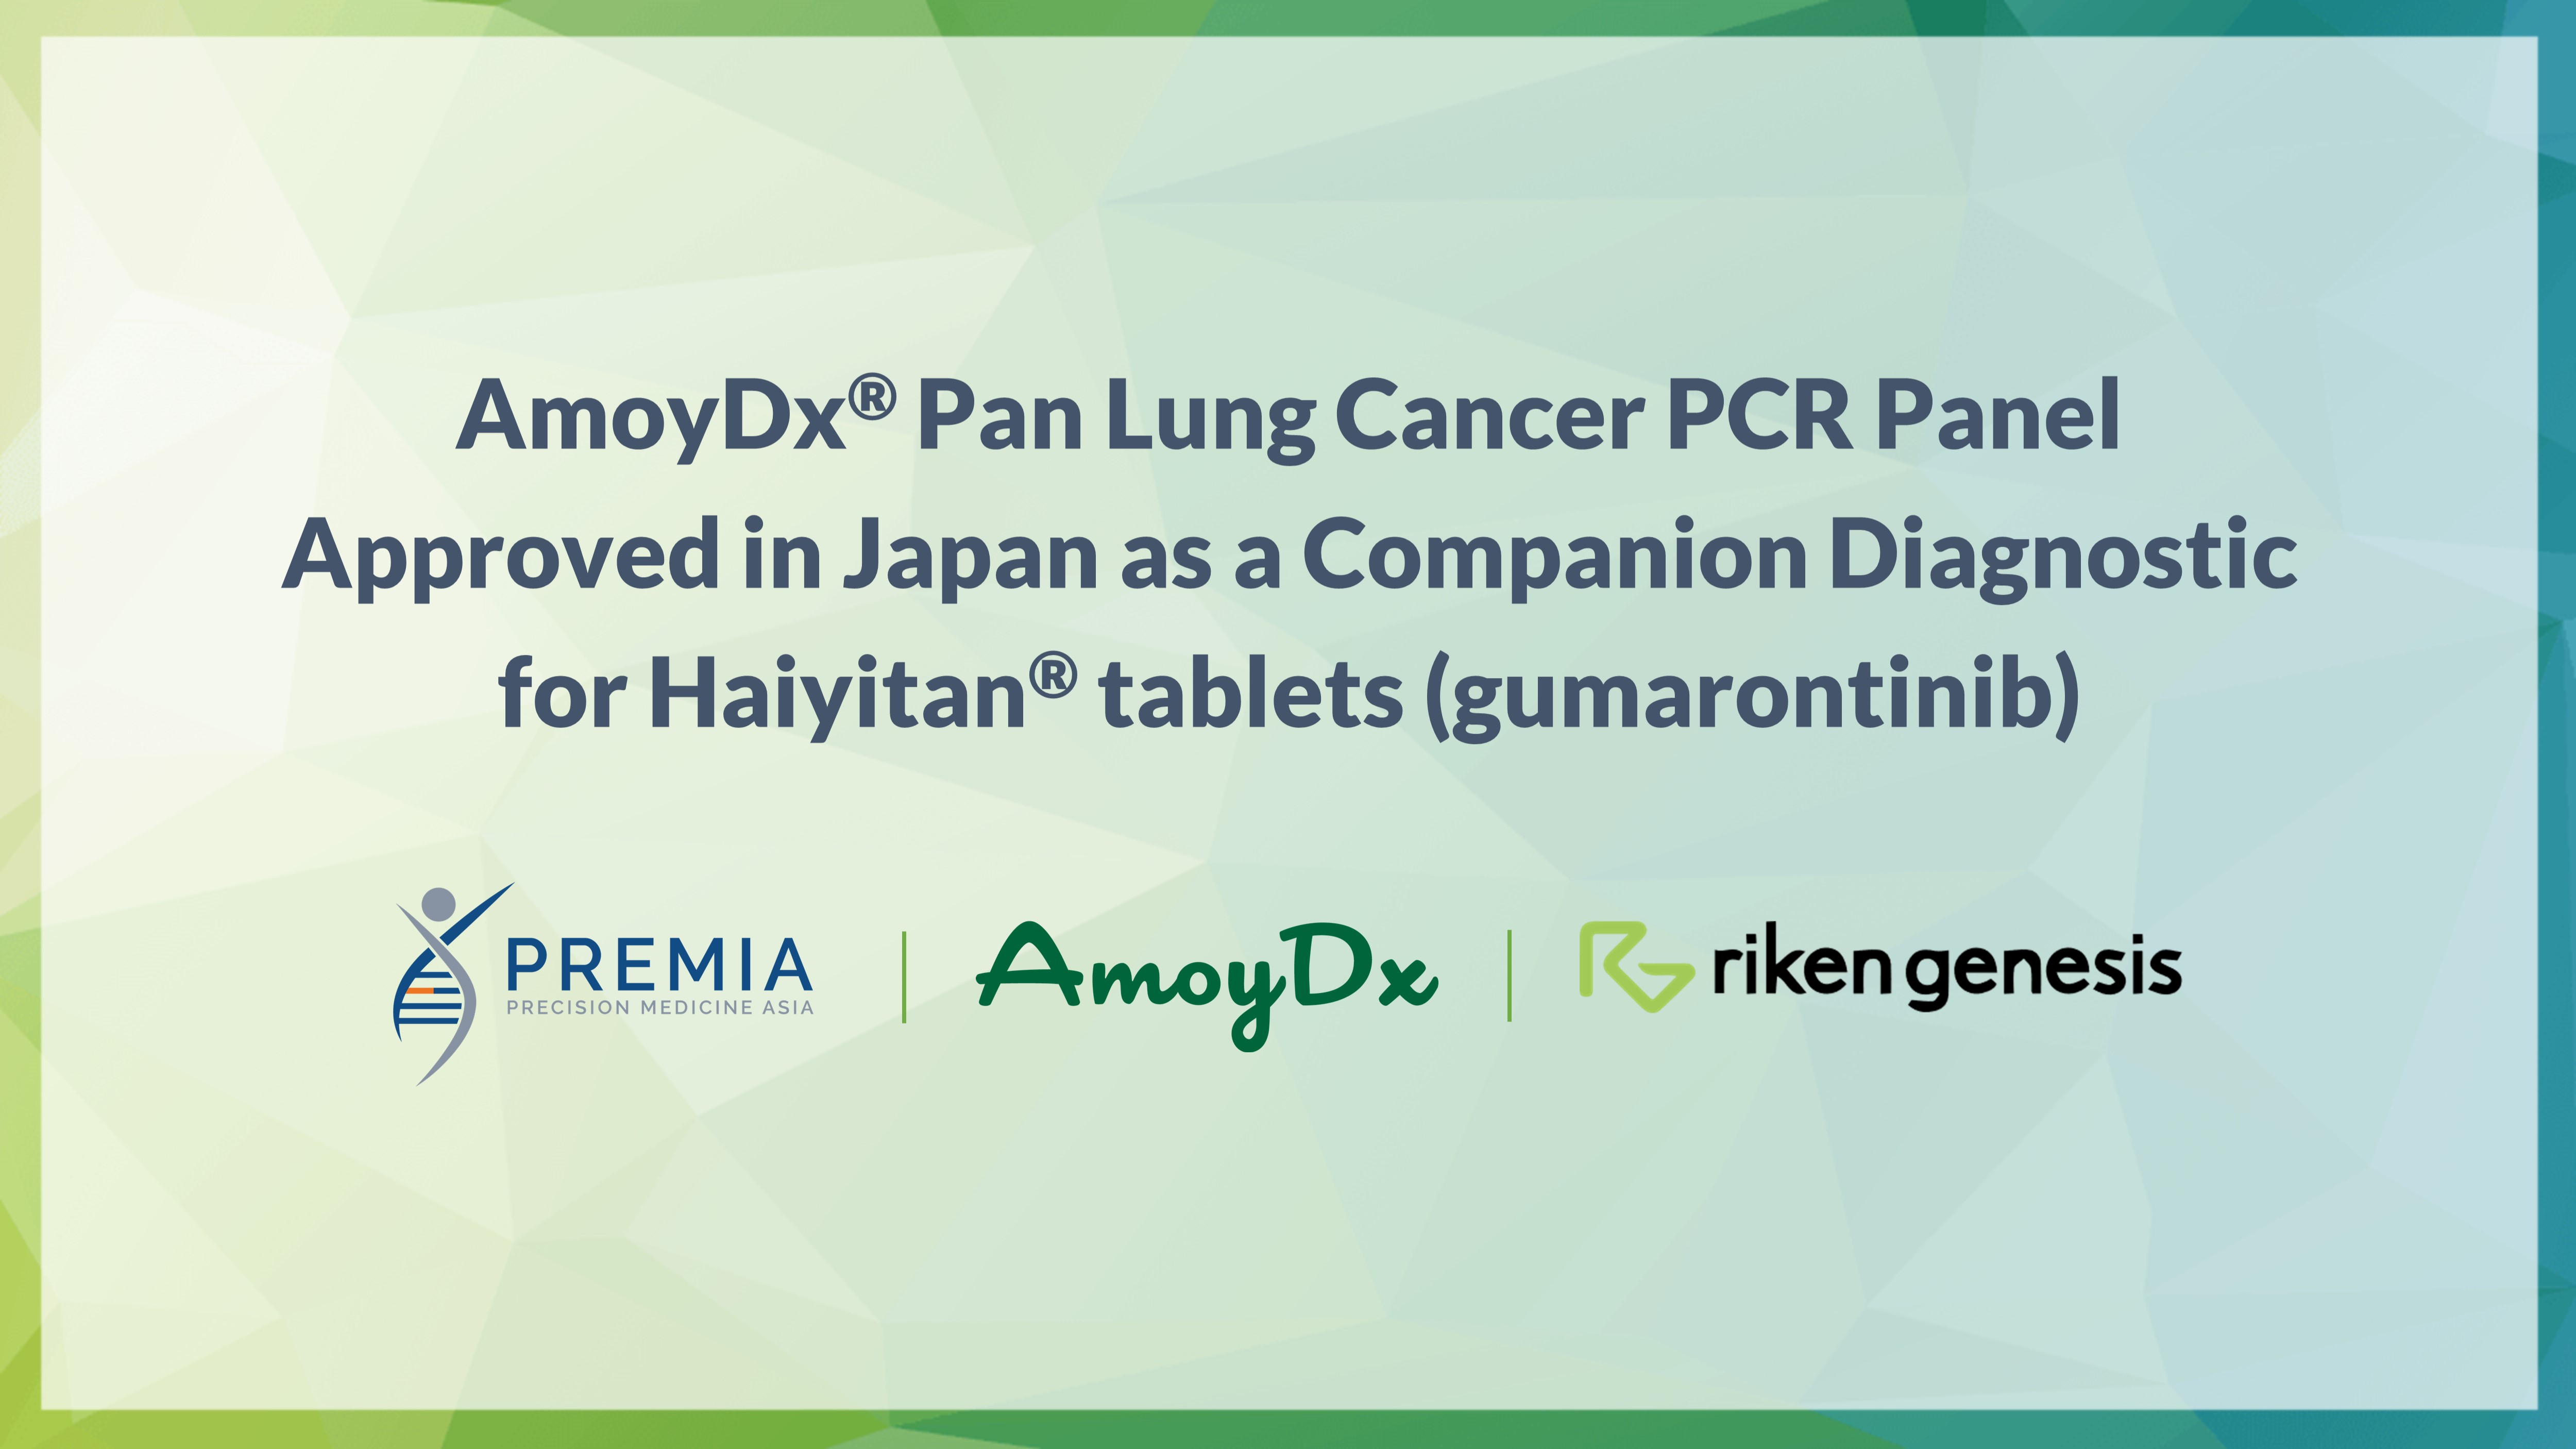 AmoyDx® Pan Lung Cancer PCR Panel Approved in Japan as a Companion Diagnostic for Haiyitan® tablets (gumarontinib)